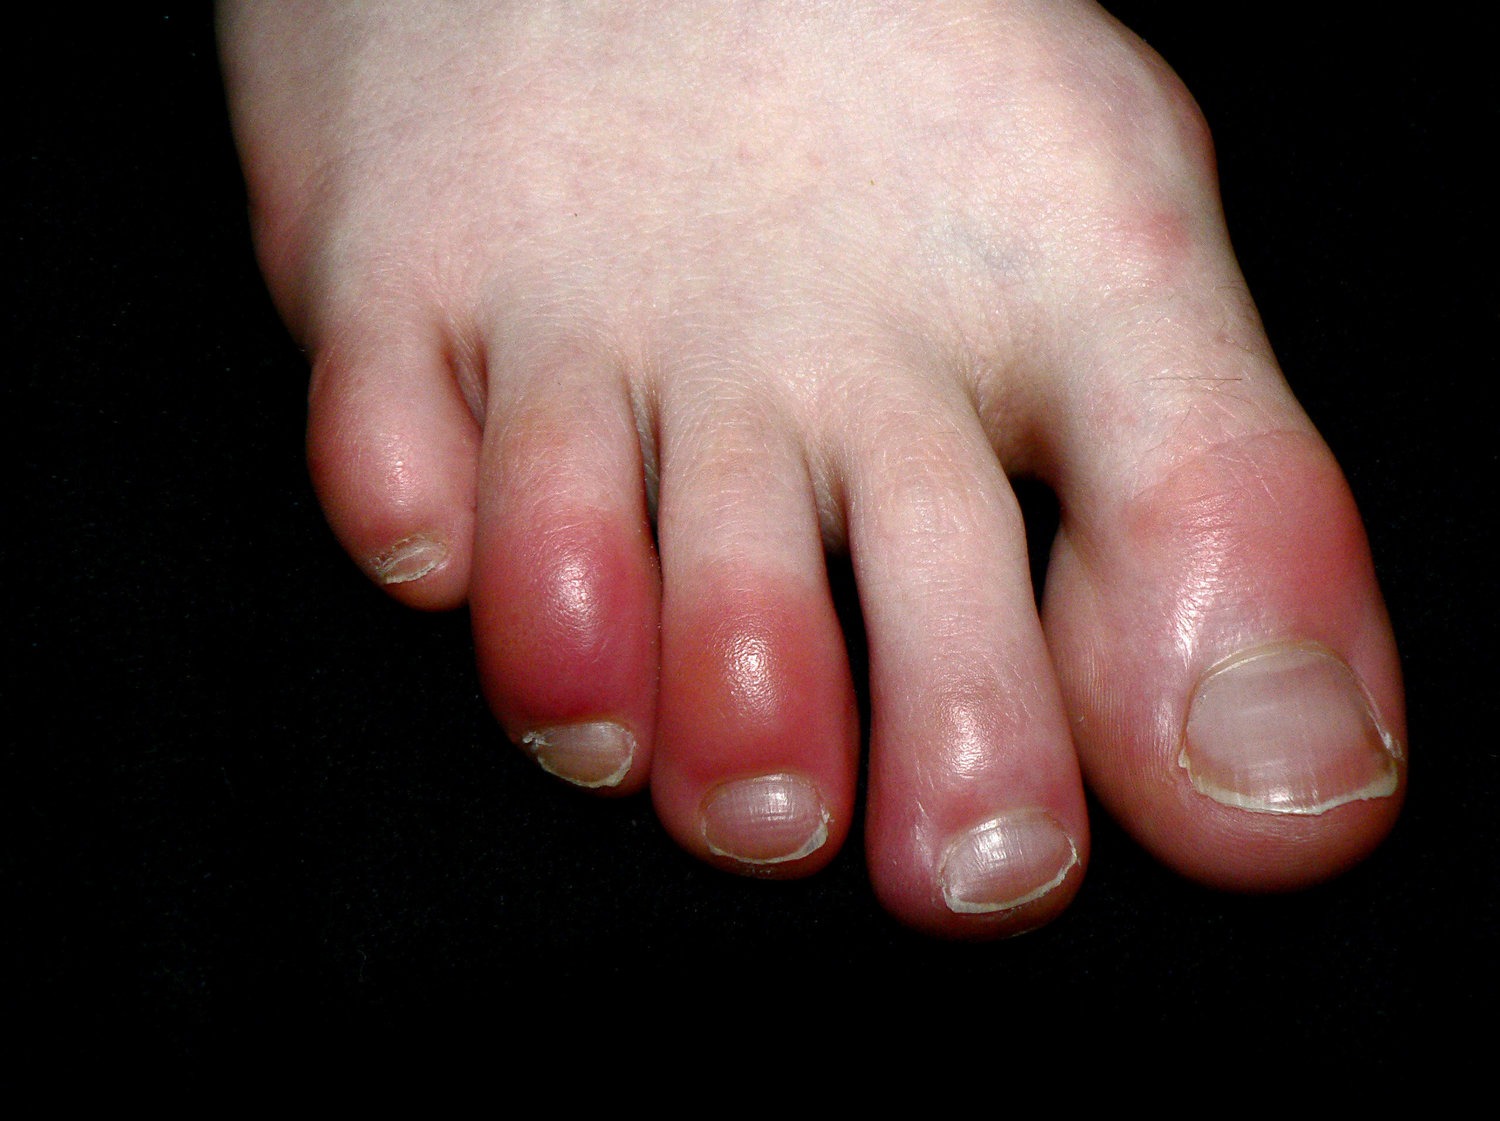 Chilblains (pictured) are itchy, red, pink or purple inflammations of the s...